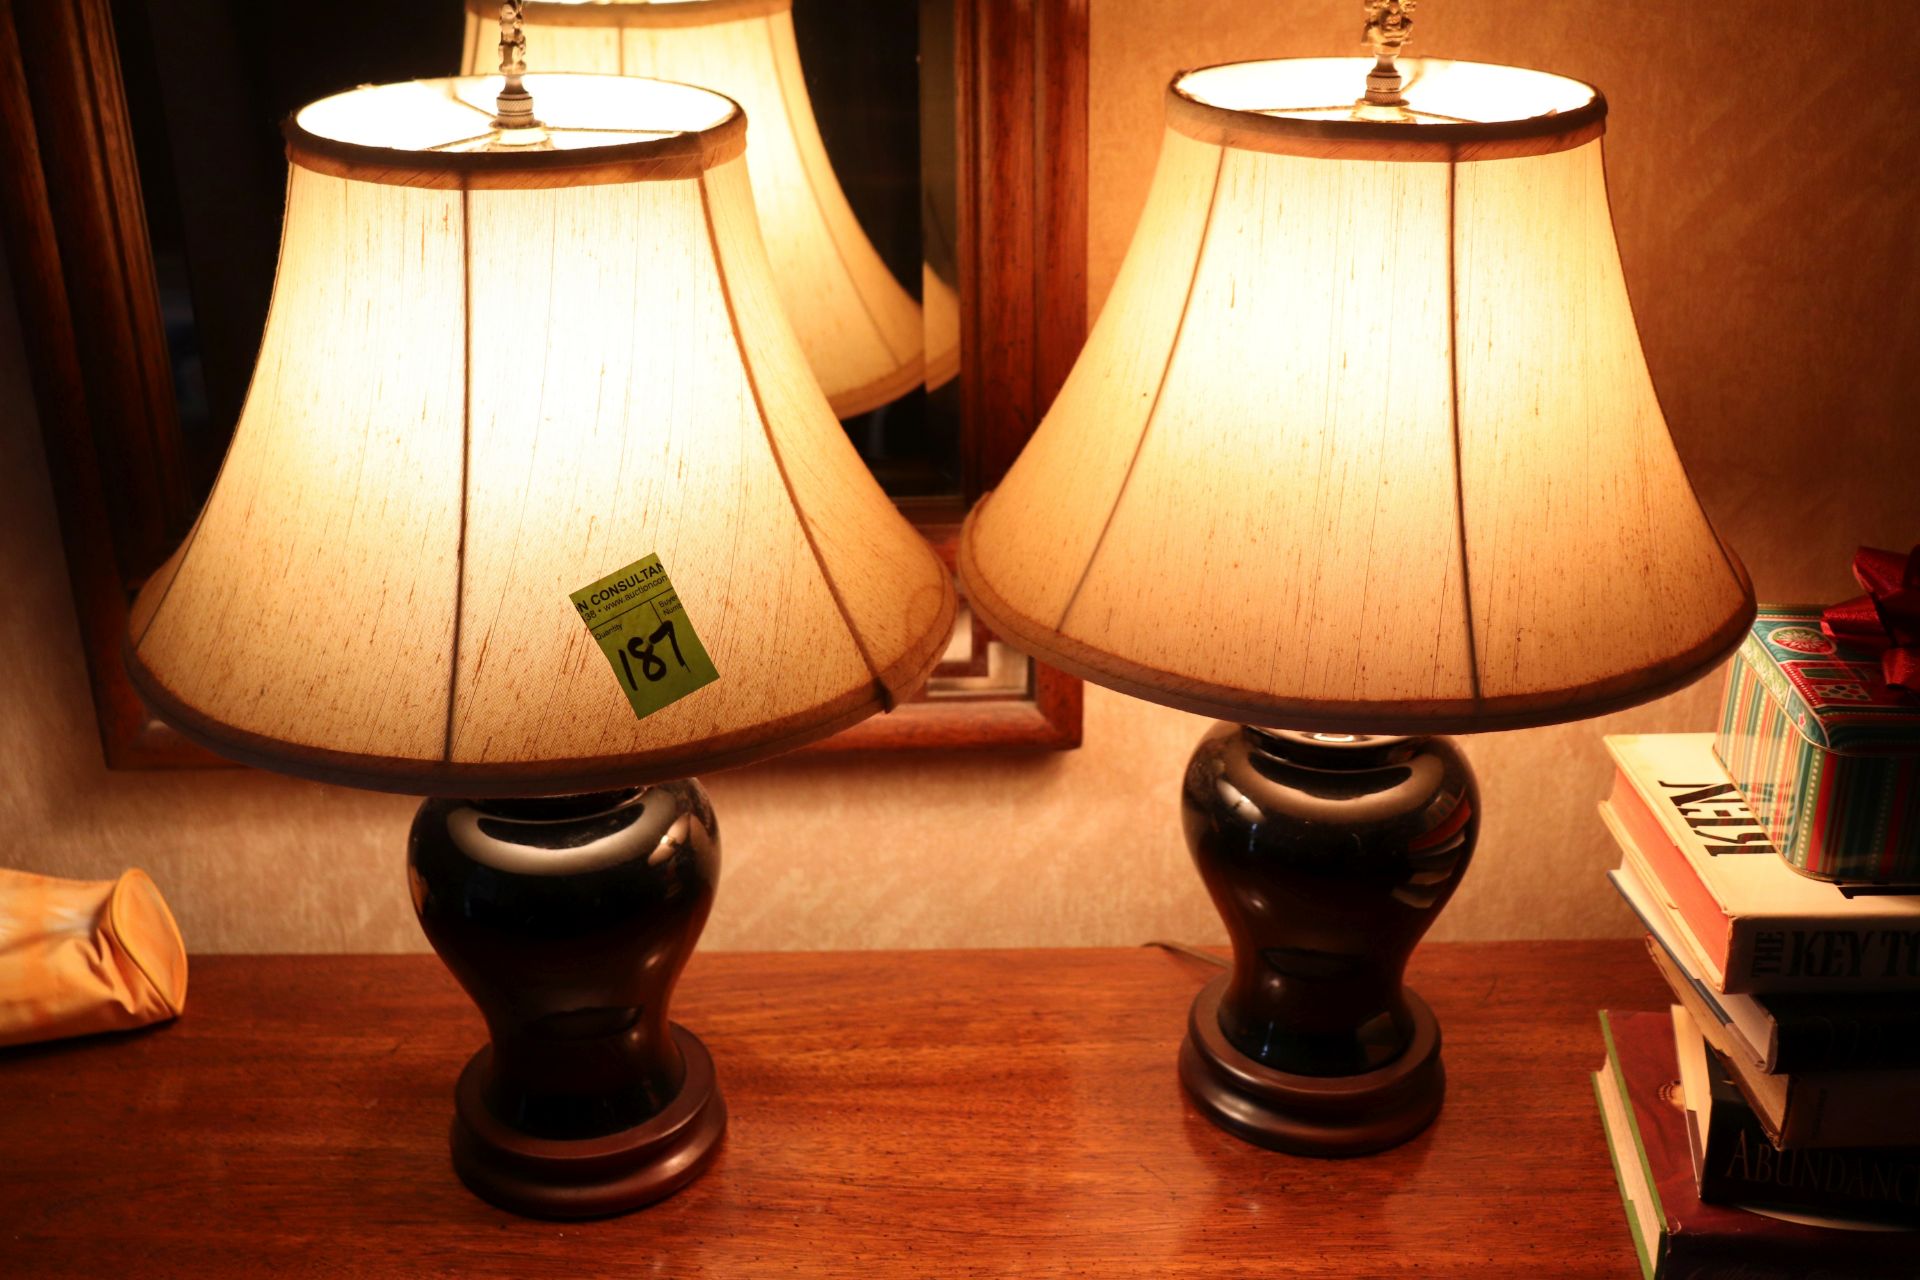 Pair of table lamps, height 20-1/2"